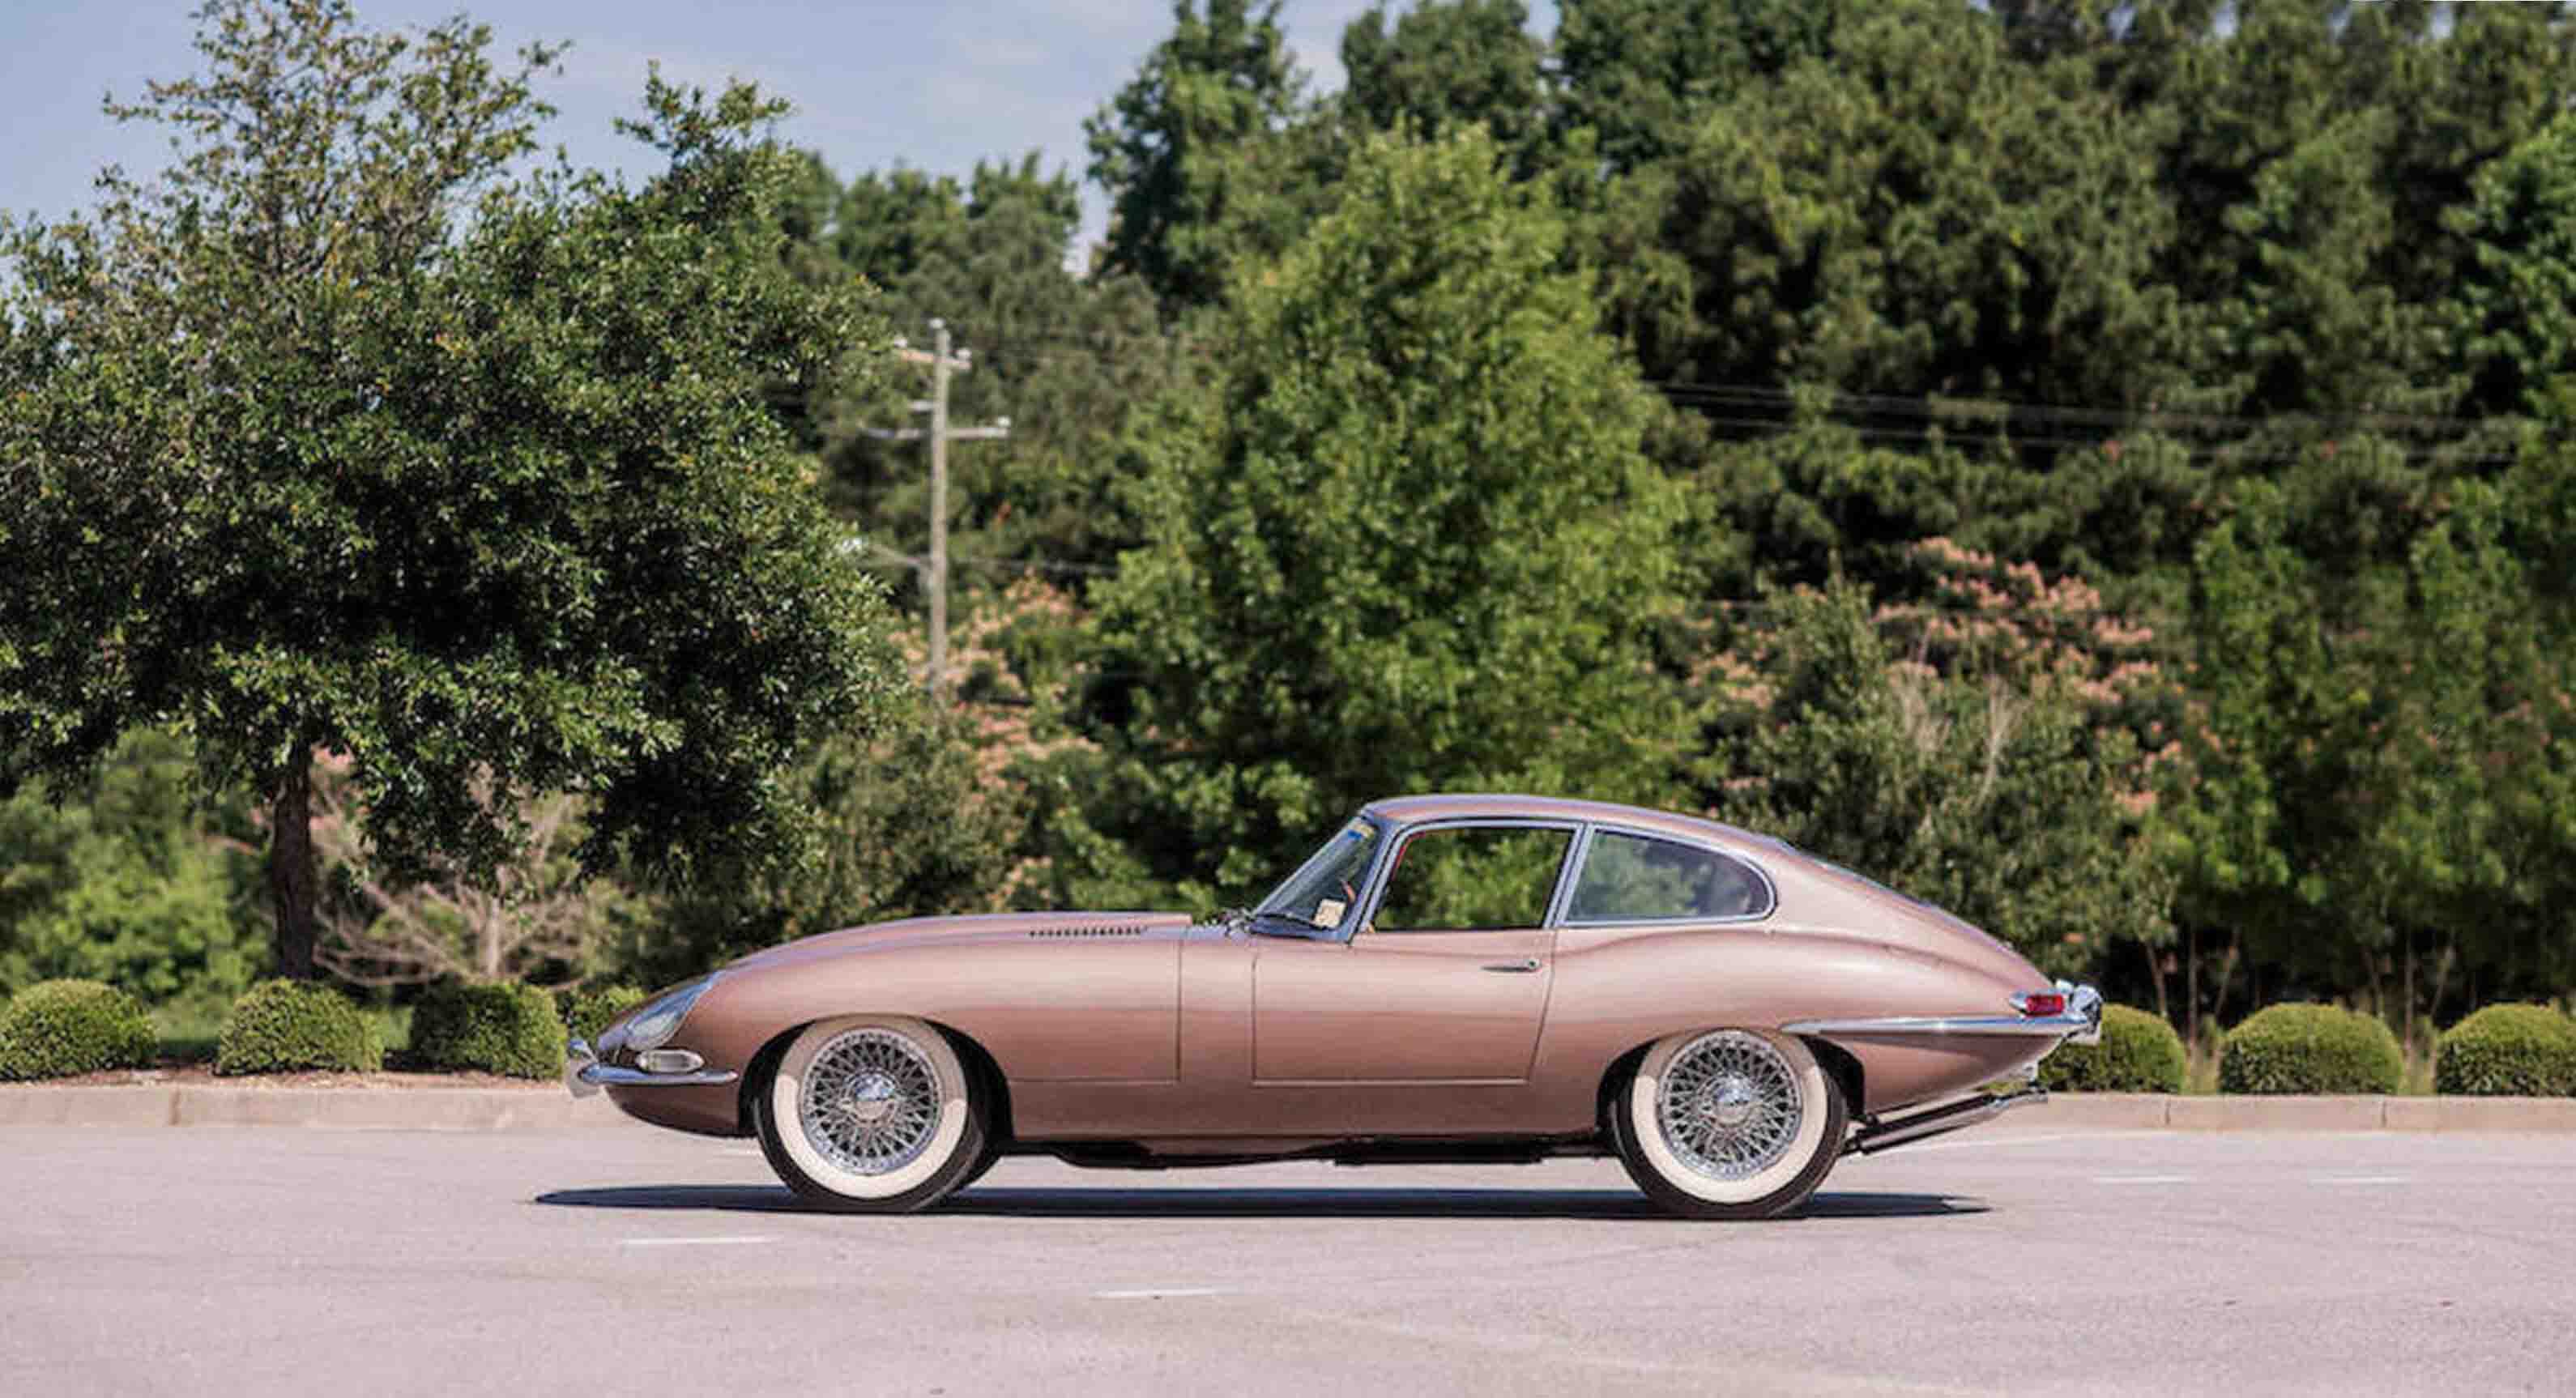 The Jaguar E Type That Everyone Is Talking About